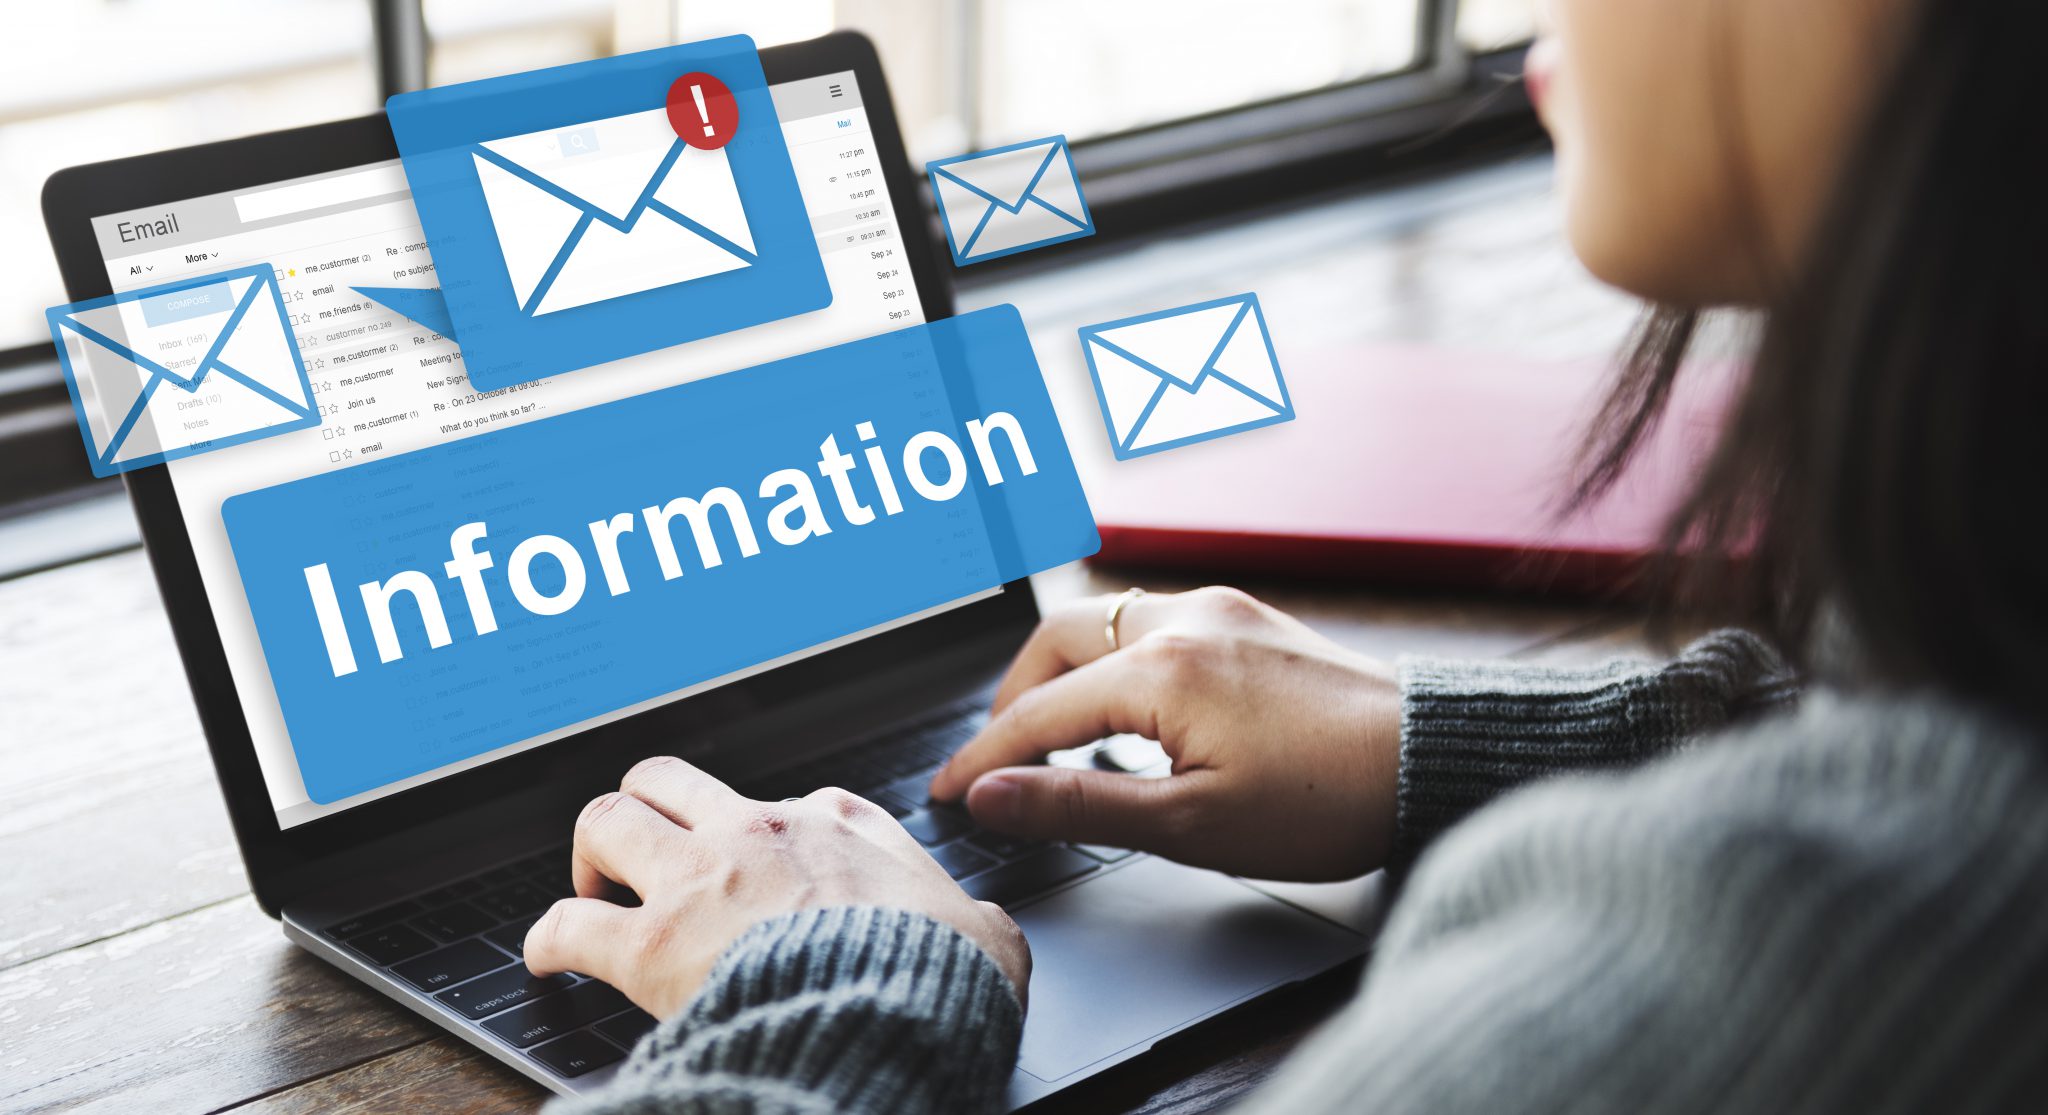 How to Turn Off Notifications in Outlook ACUTEC